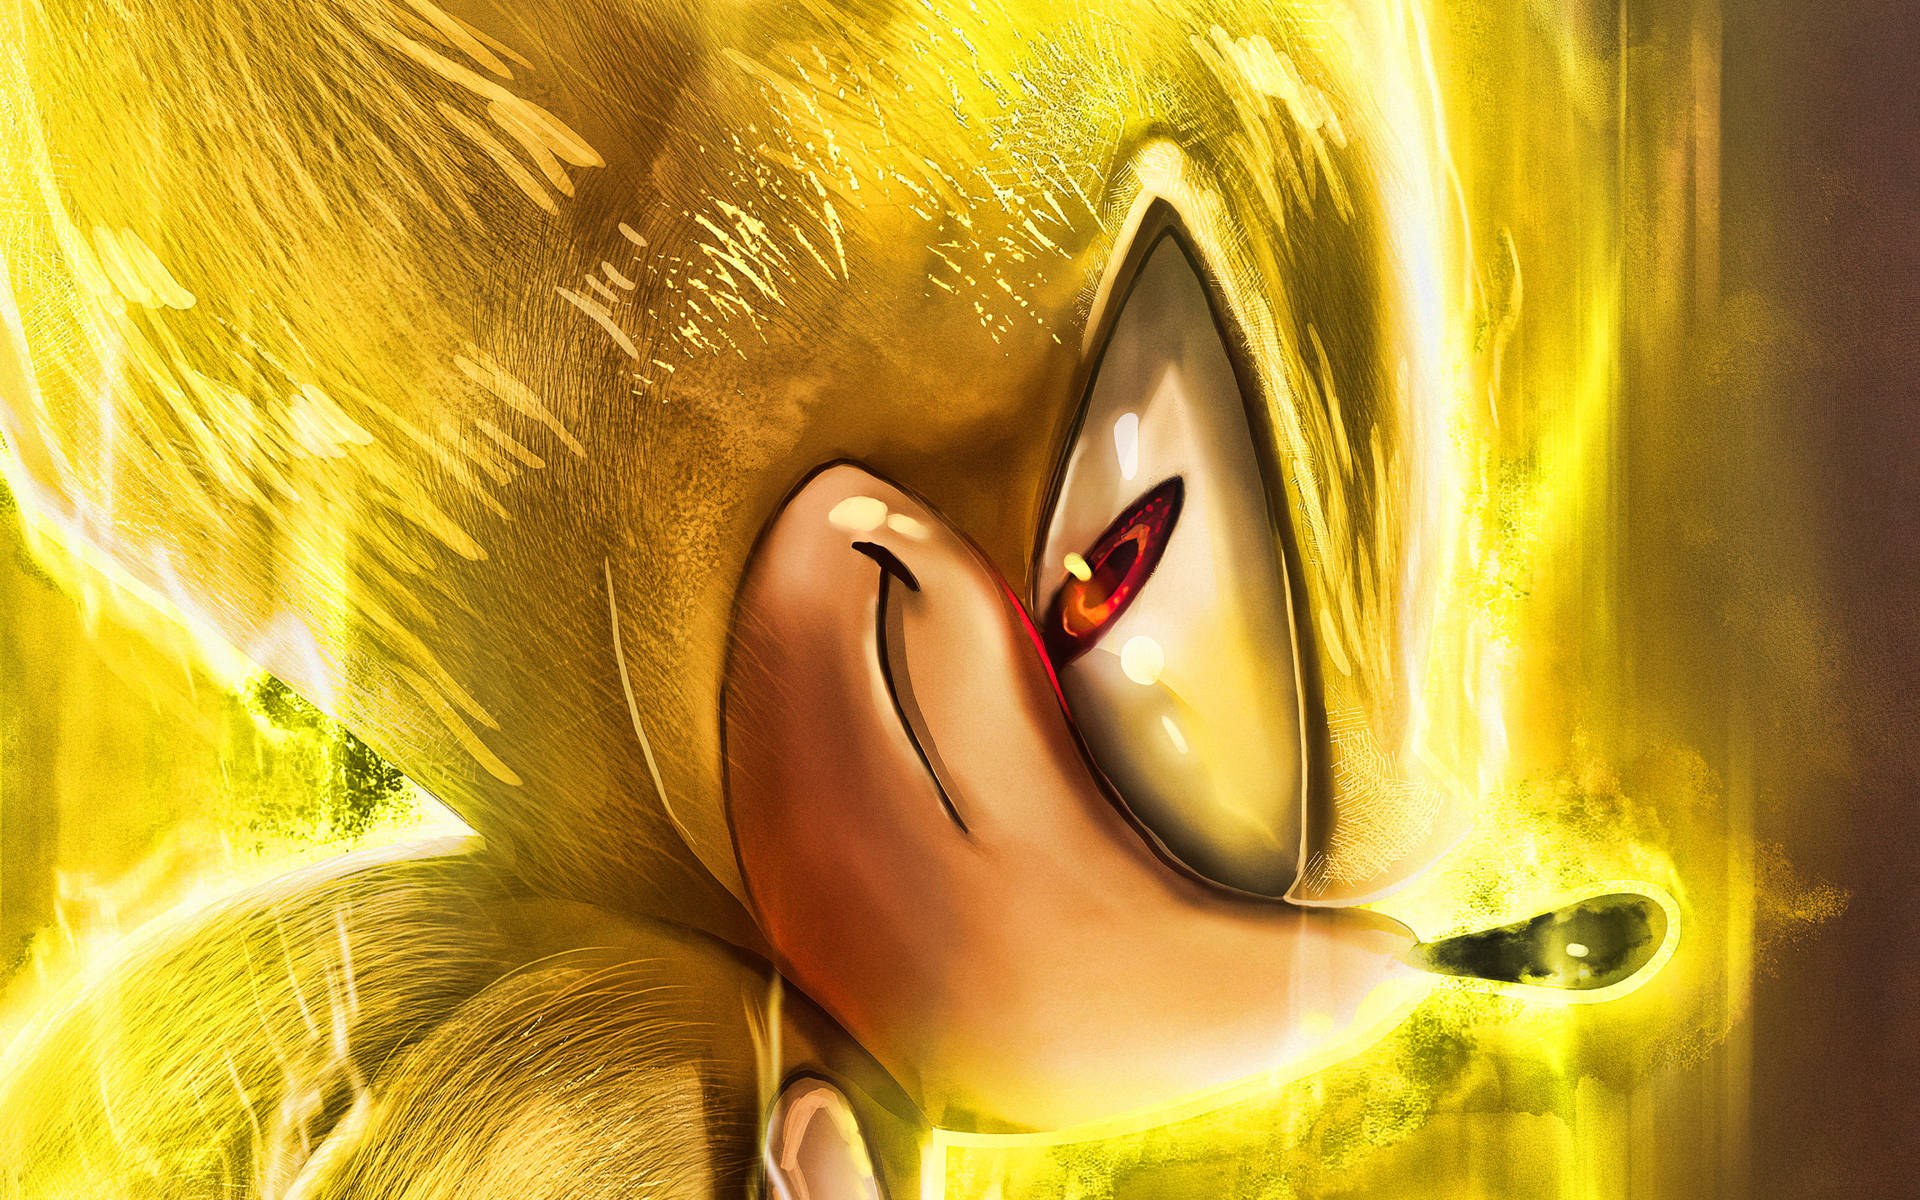 Caption: Sonic The Hedgehog Shining in Gold Wallpaper